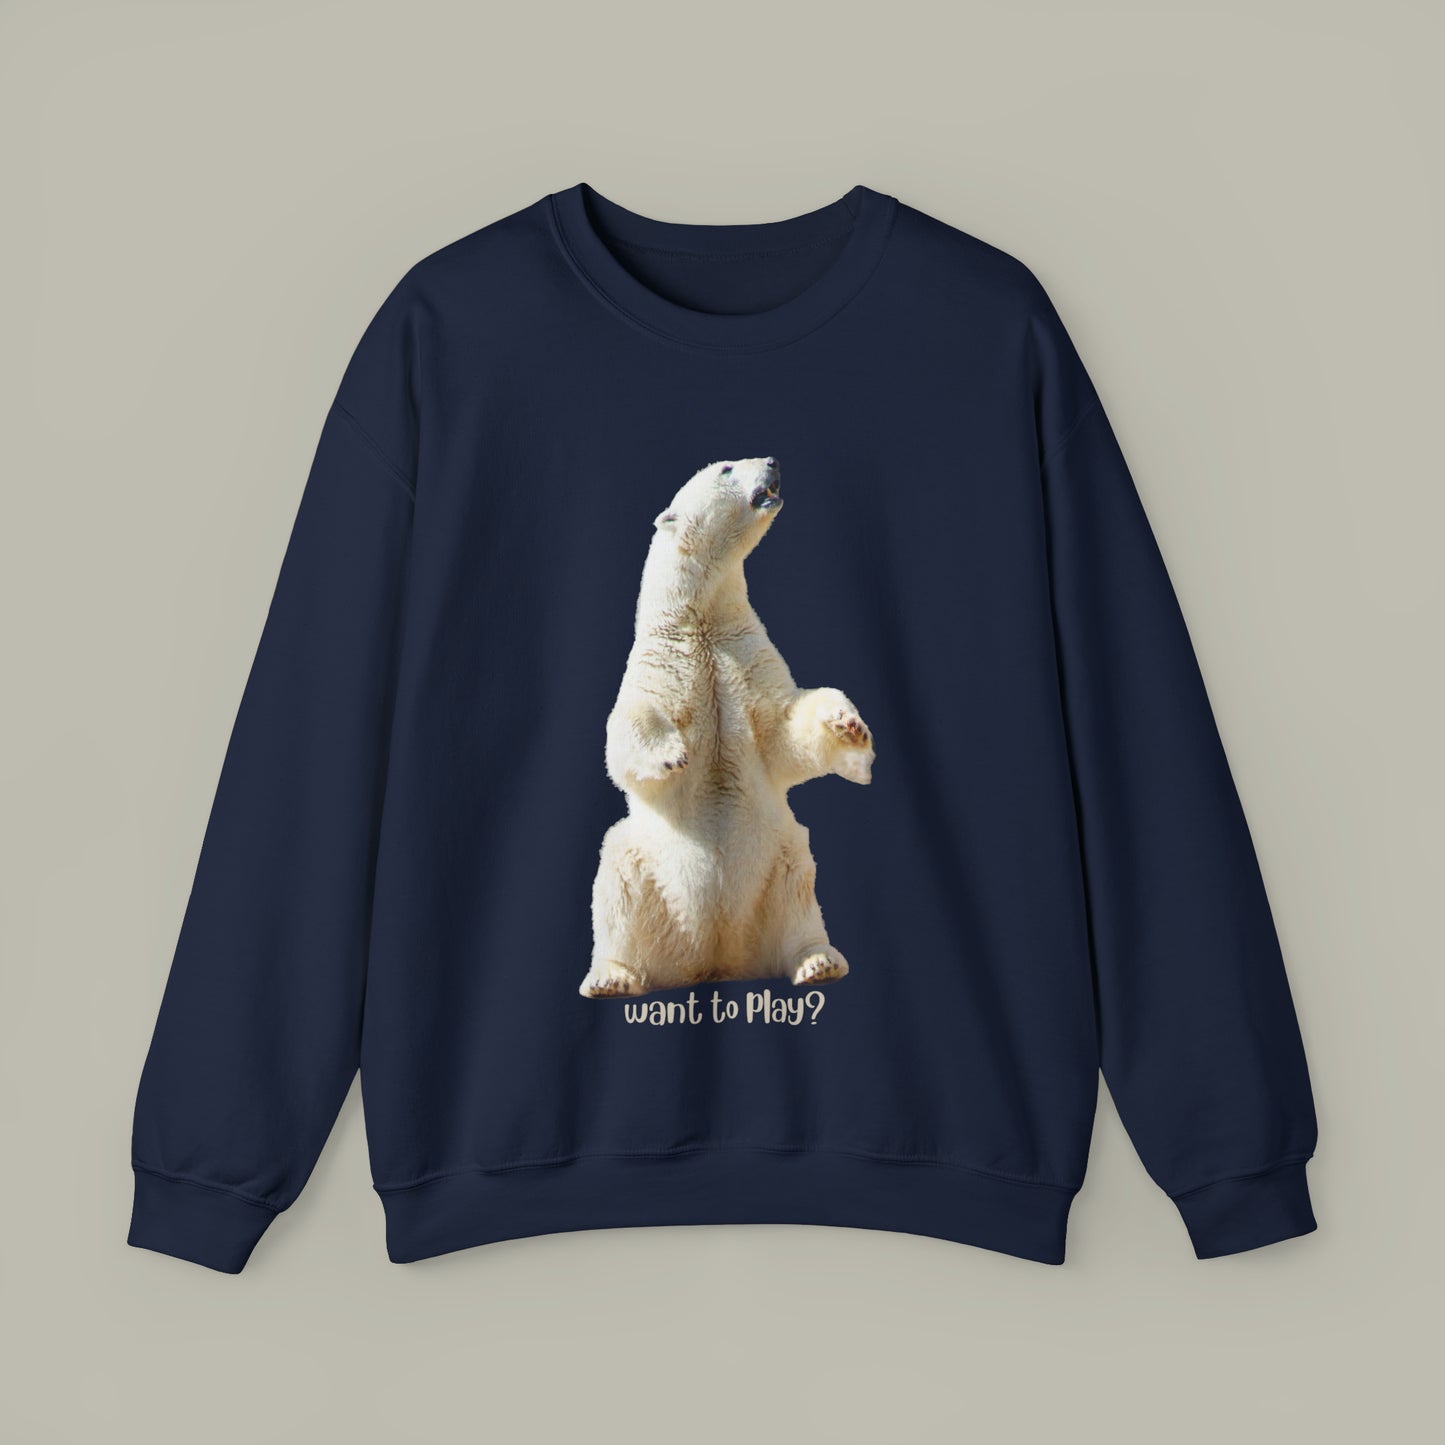 Impressive polar bear asking “Want to play?"! Play like you mean it! Give the gift of this Unisex Heavy Blend™ Crewneck Sweatshirt or get one for yourself.